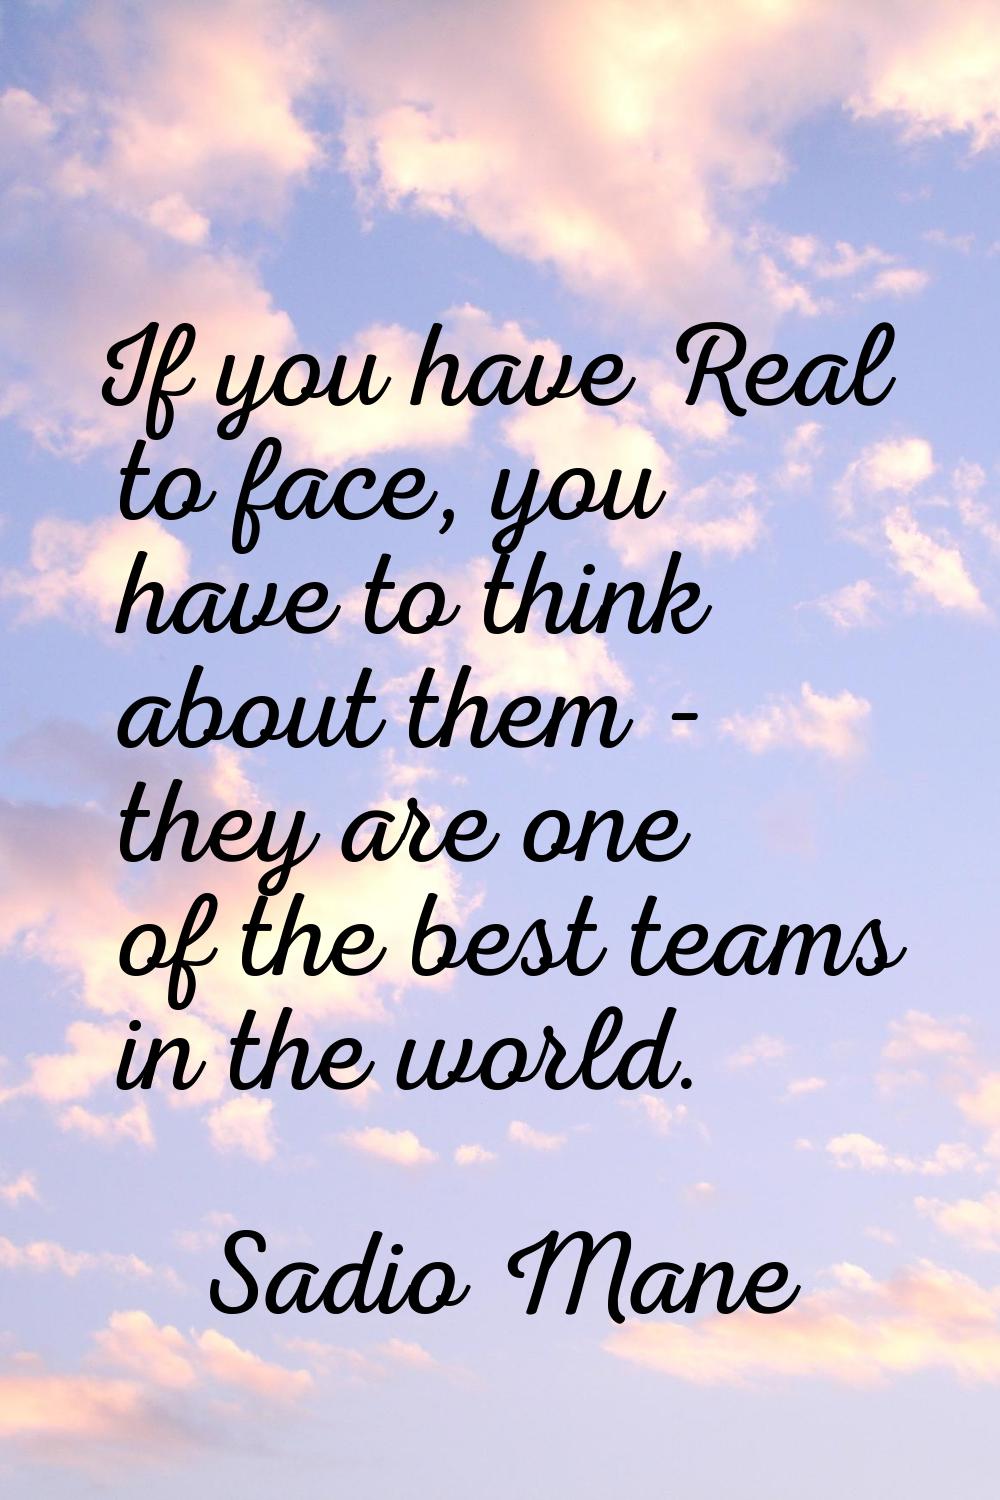 If you have Real to face, you have to think about them - they are one of the best teams in the worl